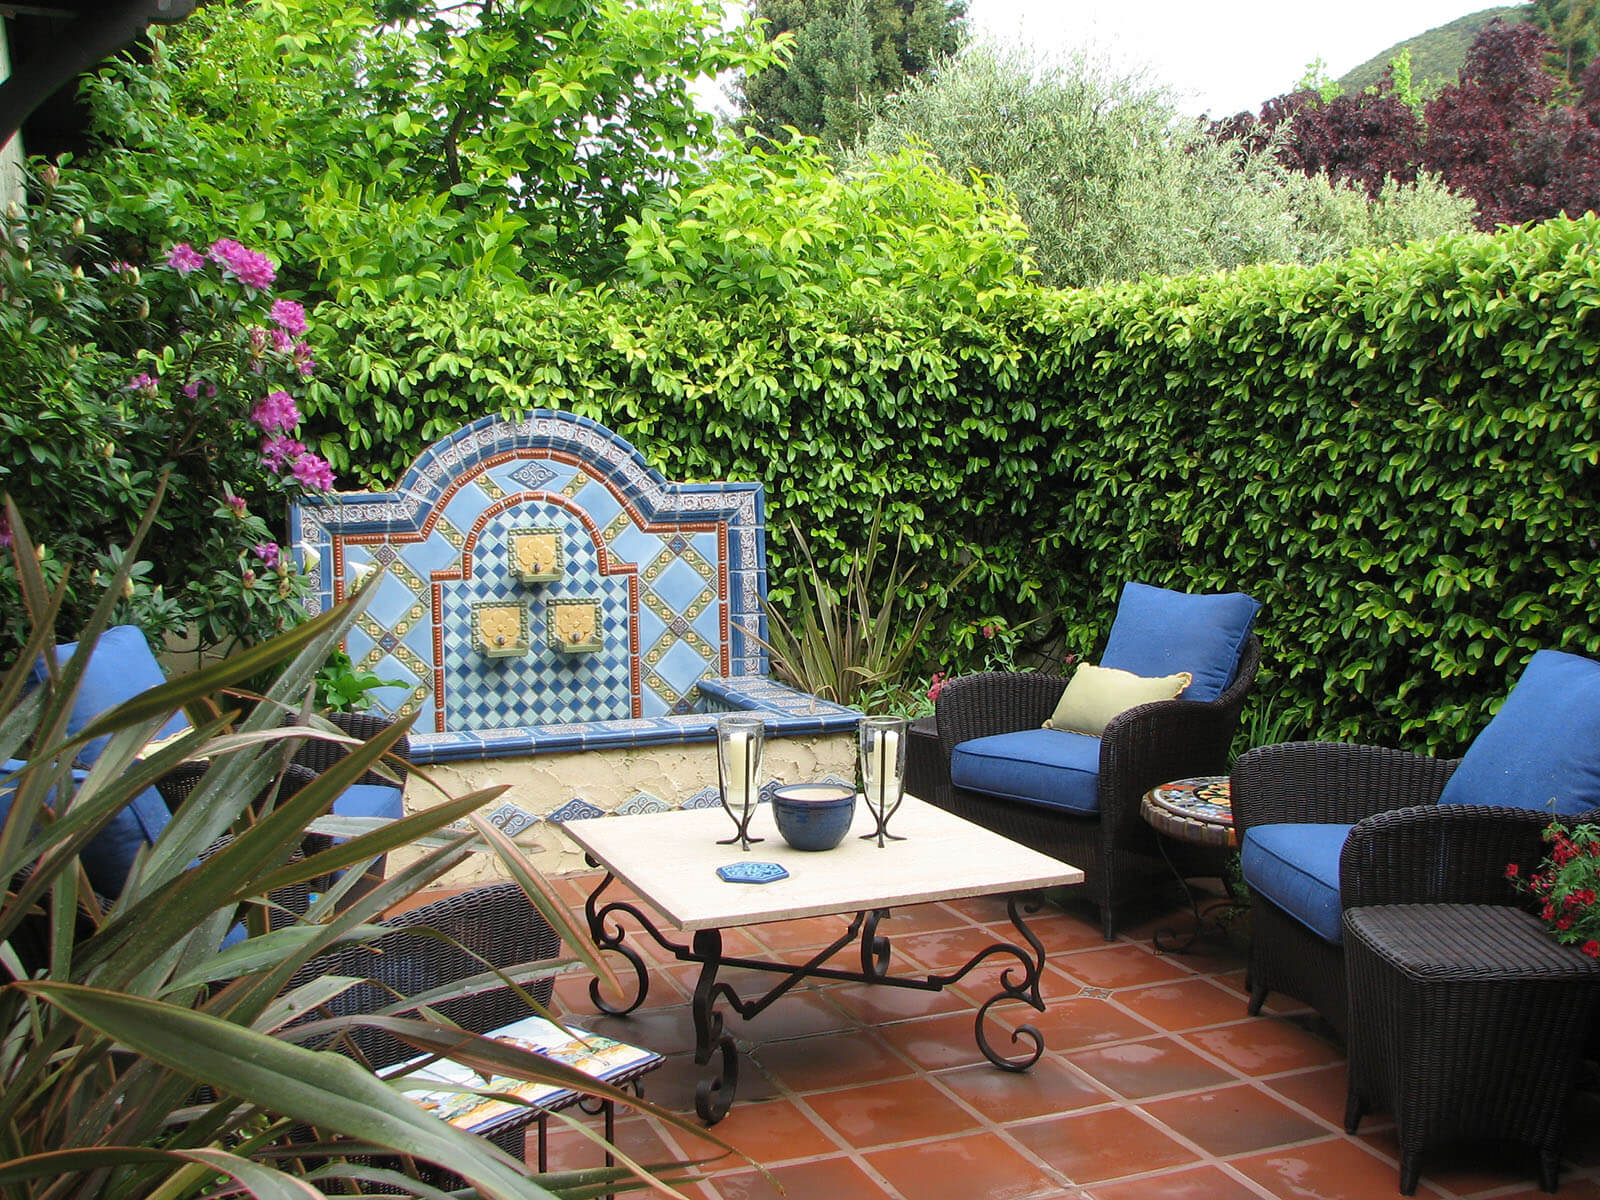 greenery walls hiding a quaint brick patio with blue and red mosaic fountain and outdoor dining set